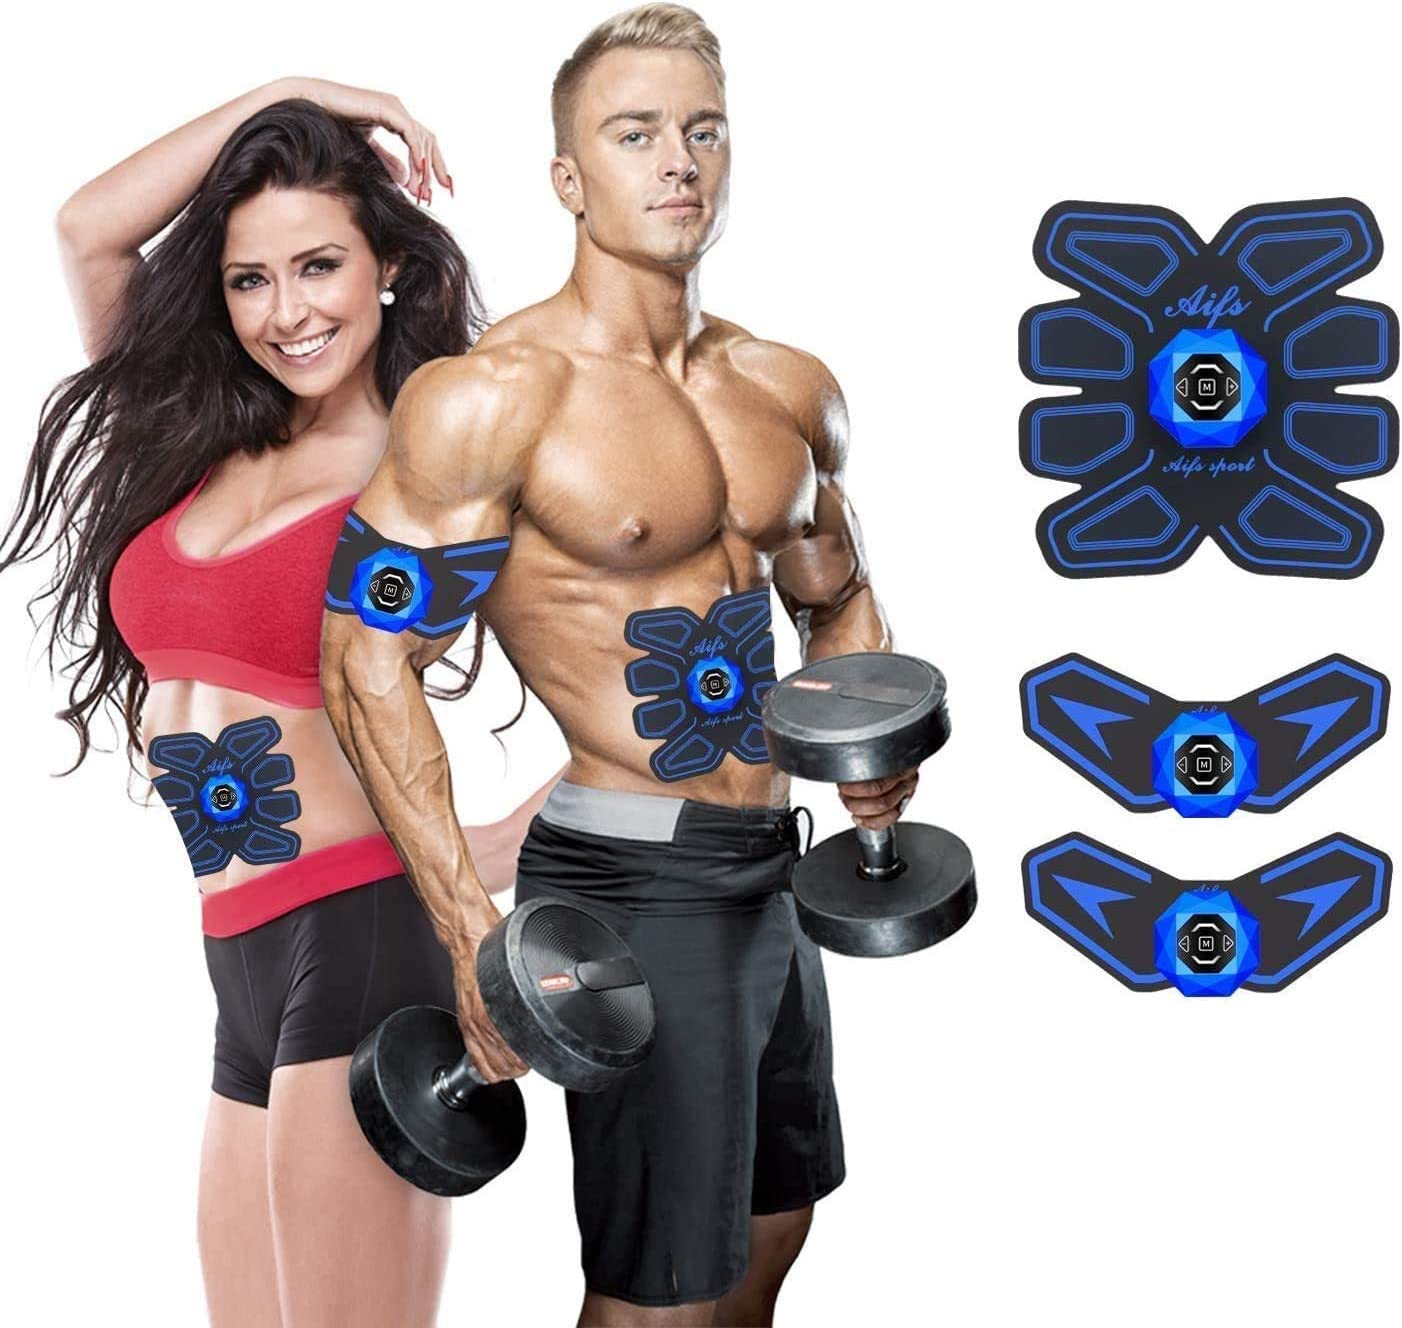 Stimulator Muscle Toner Rechargeable Muscle Trainer Ultimate Abs Stimulator for Men Women Abdominal Work Out Ads Power Fitness Abs Muscle